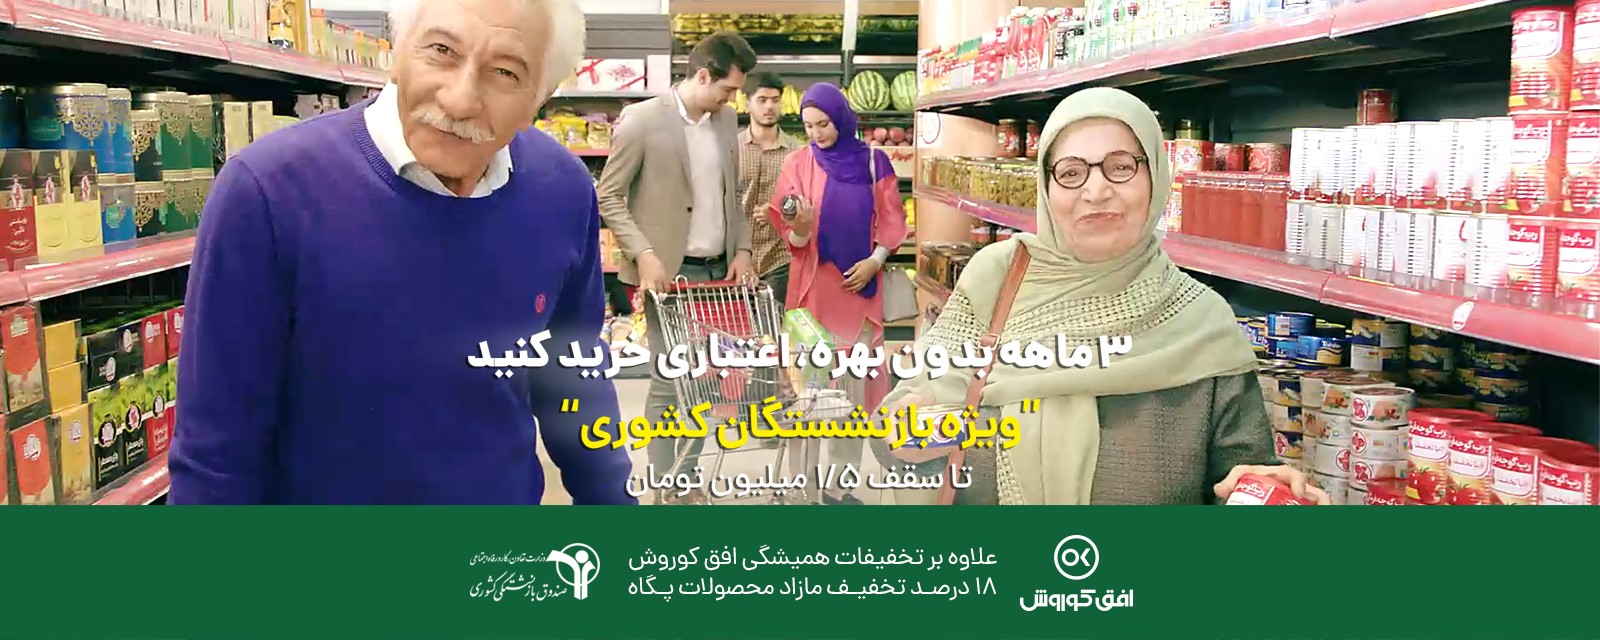 1.5 million Tomans for retirees nationwide, to shop at Ofoq Kourosh in payments